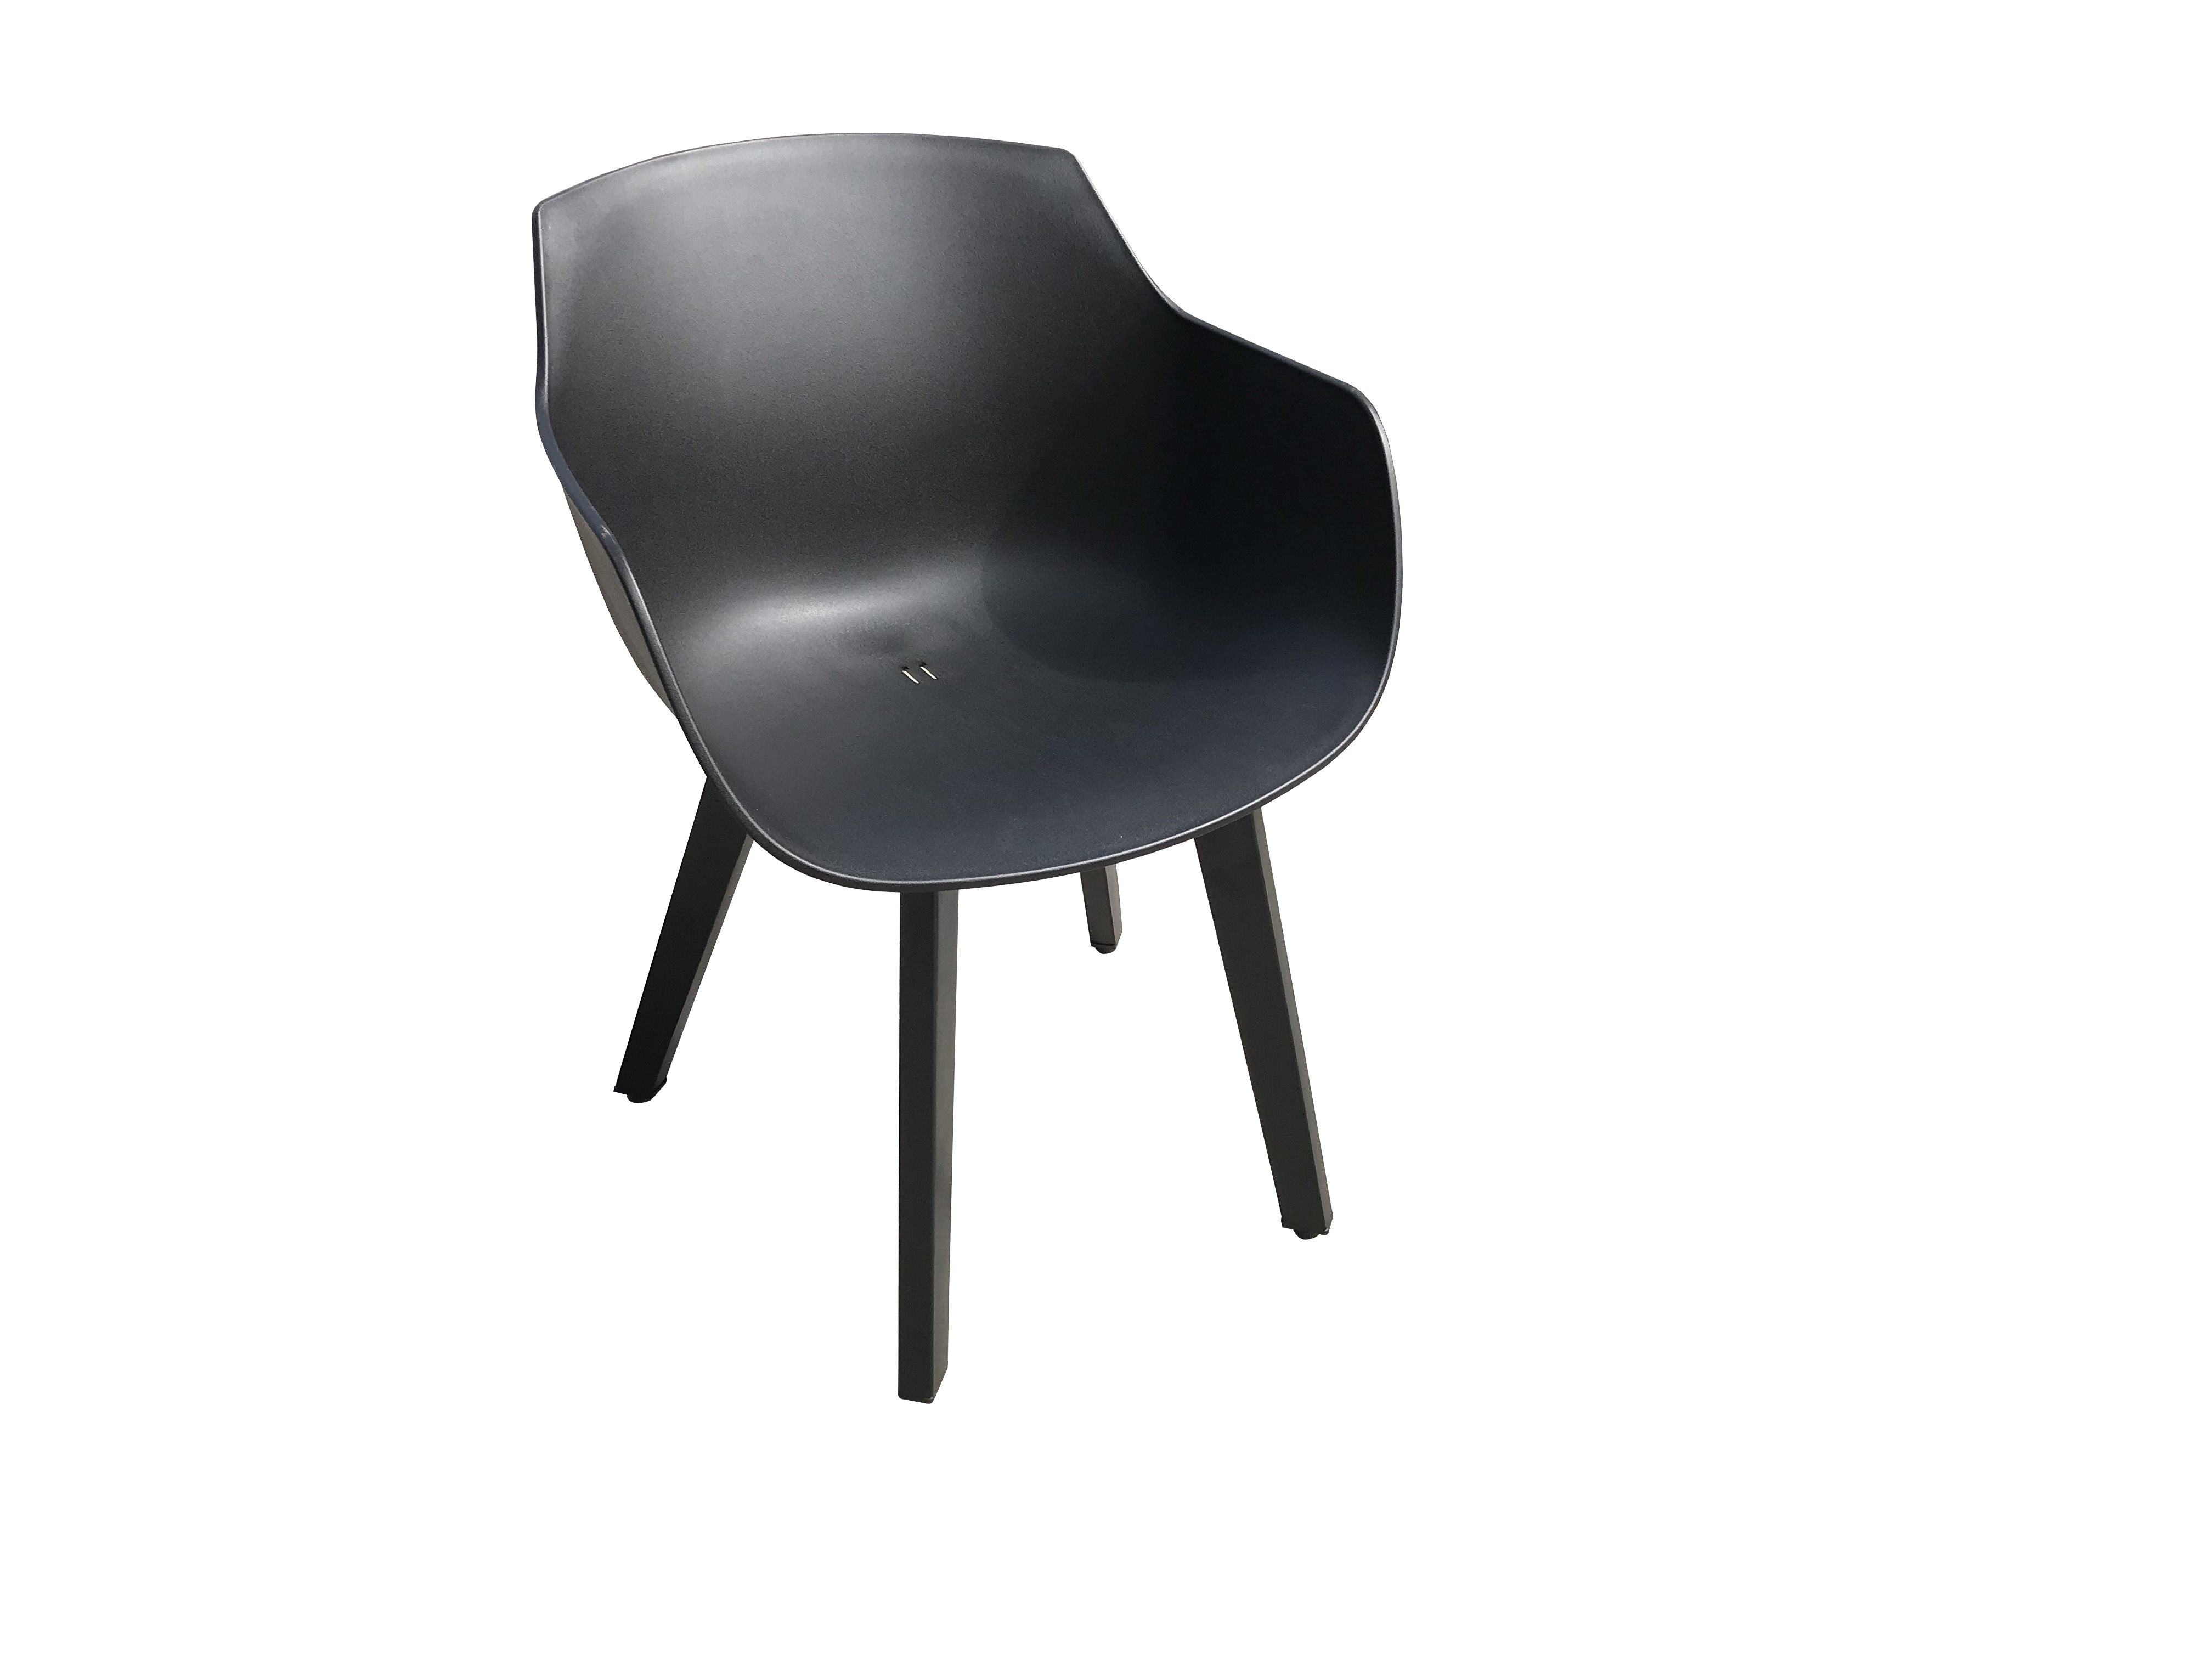 PatioZone Molded Plastic Armchair with Aluminum Frame (MOSS-0001N) - Black